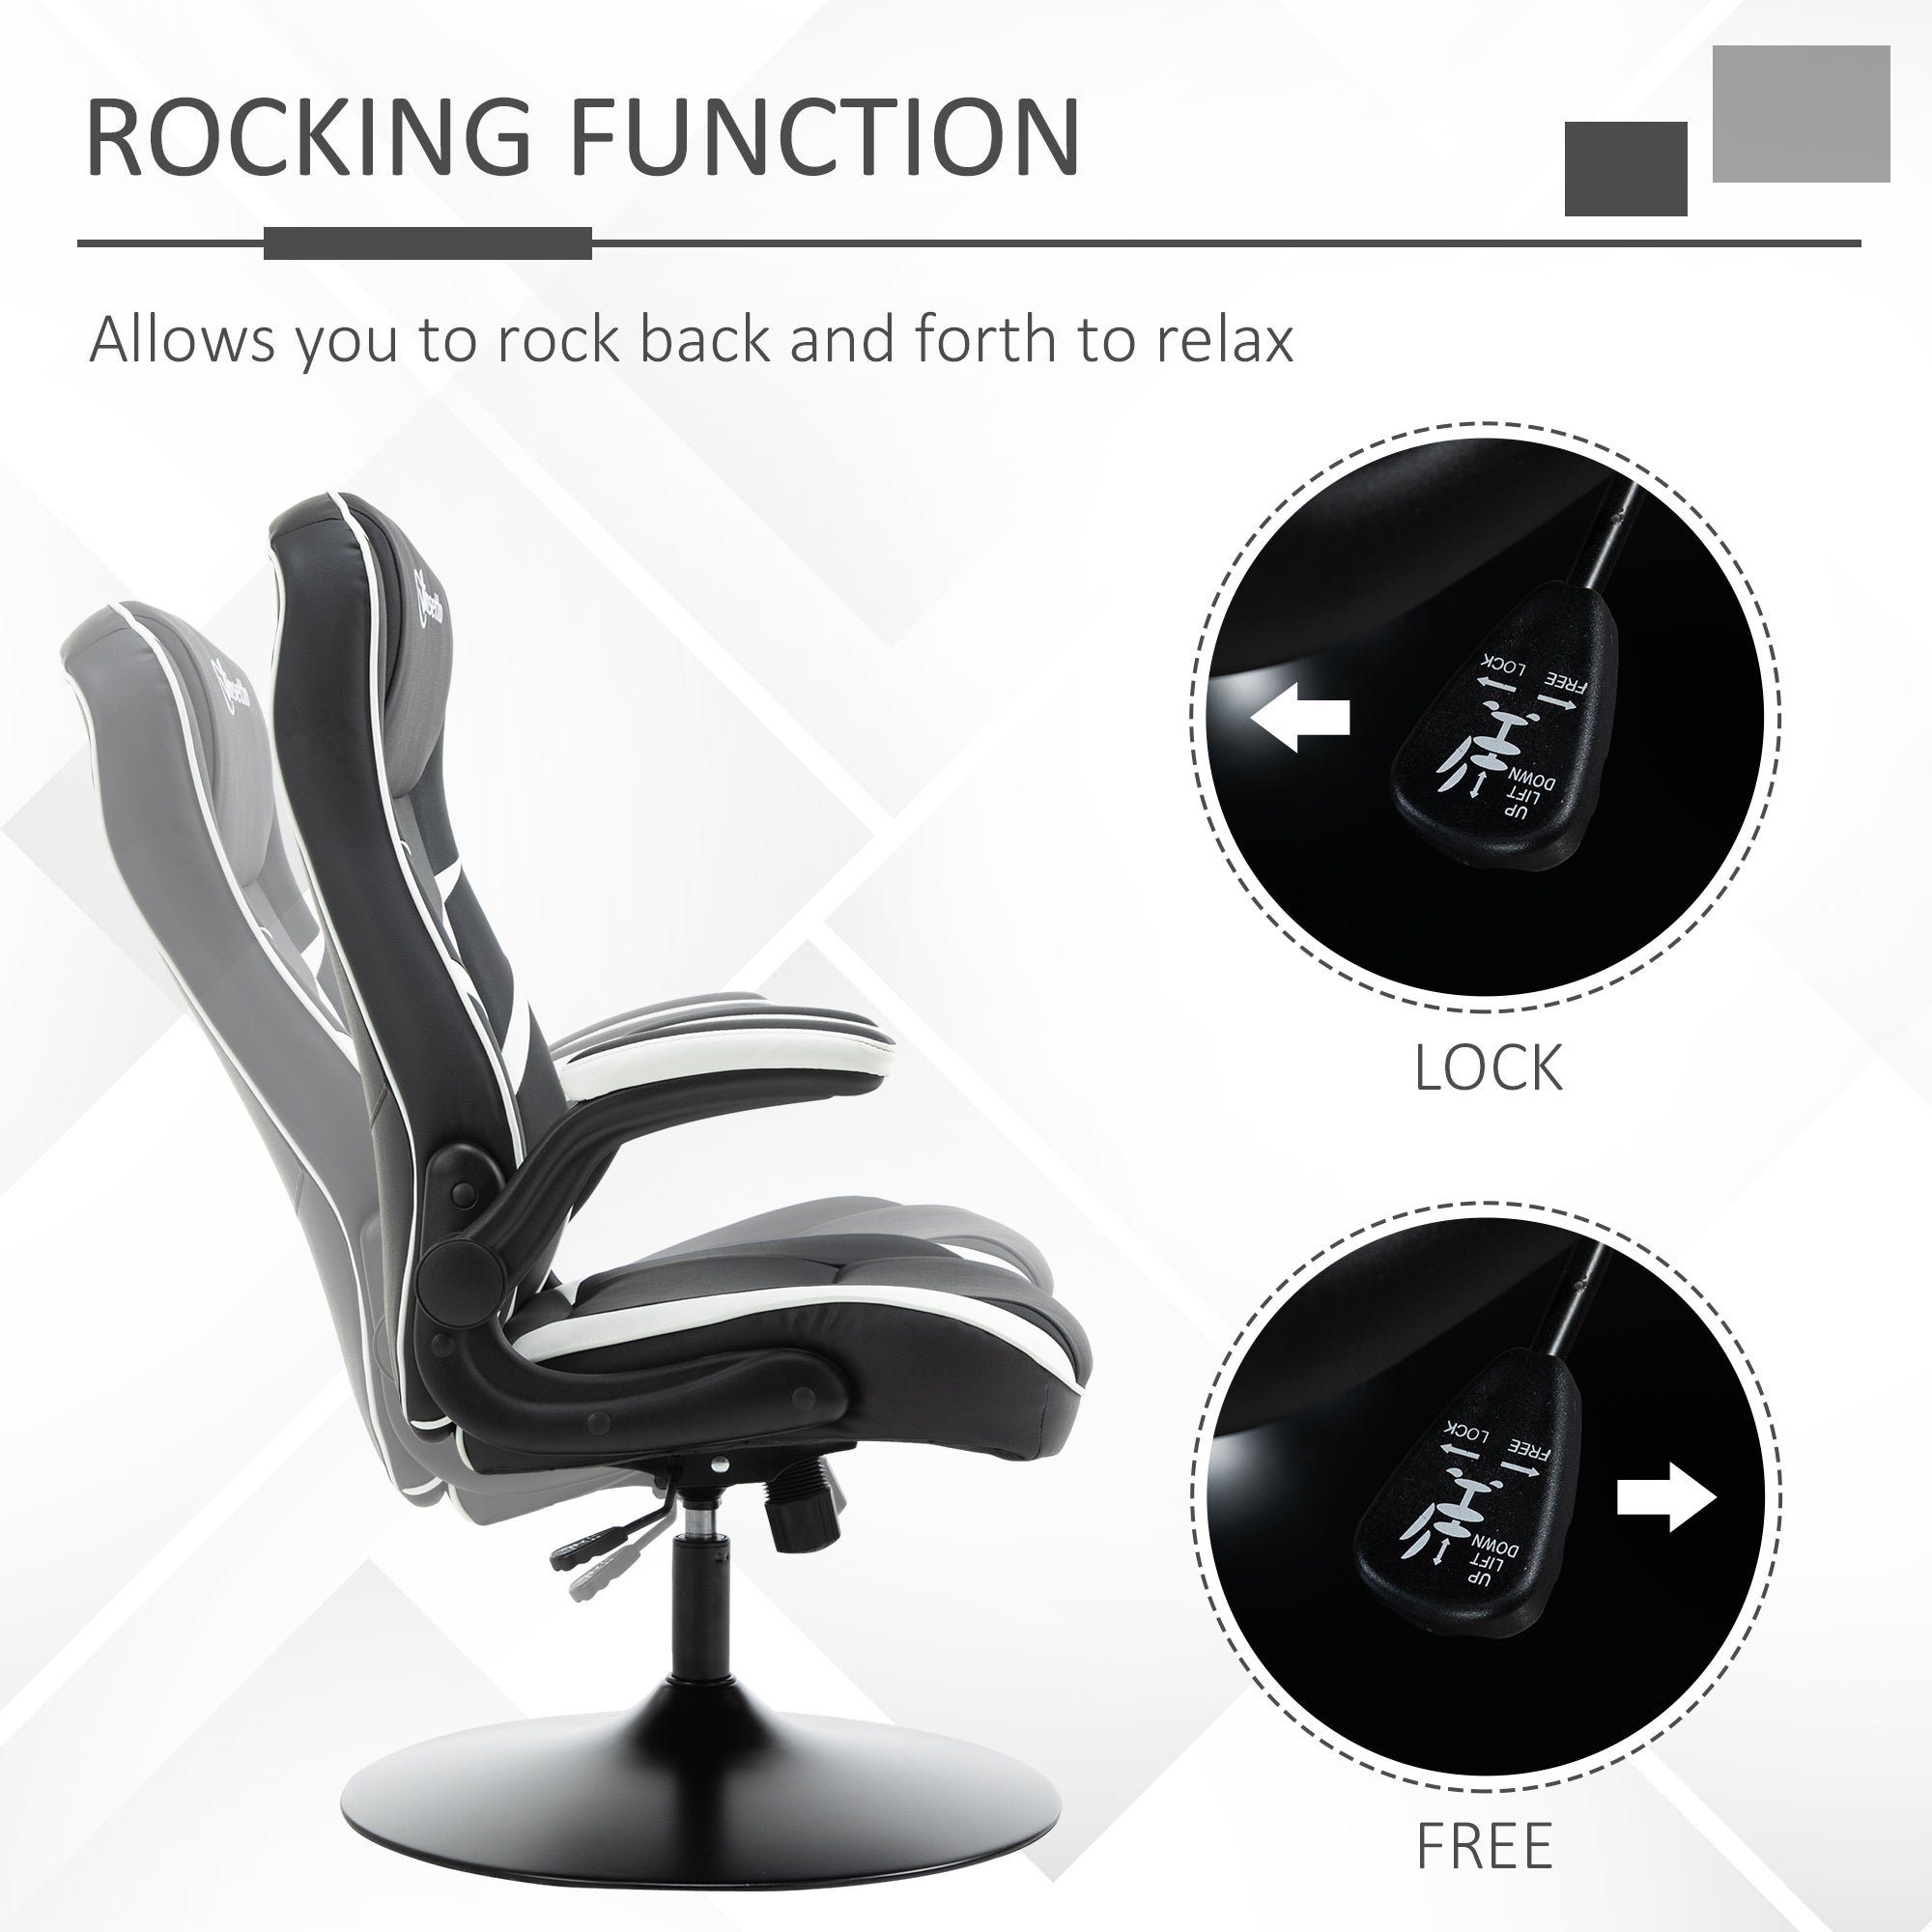 Gaming Chair Ergonomic Computer Chair Home Office Desk Swivel Chair w/ Adjustable Height Pedestal Base PVC Leather, Black & White-4